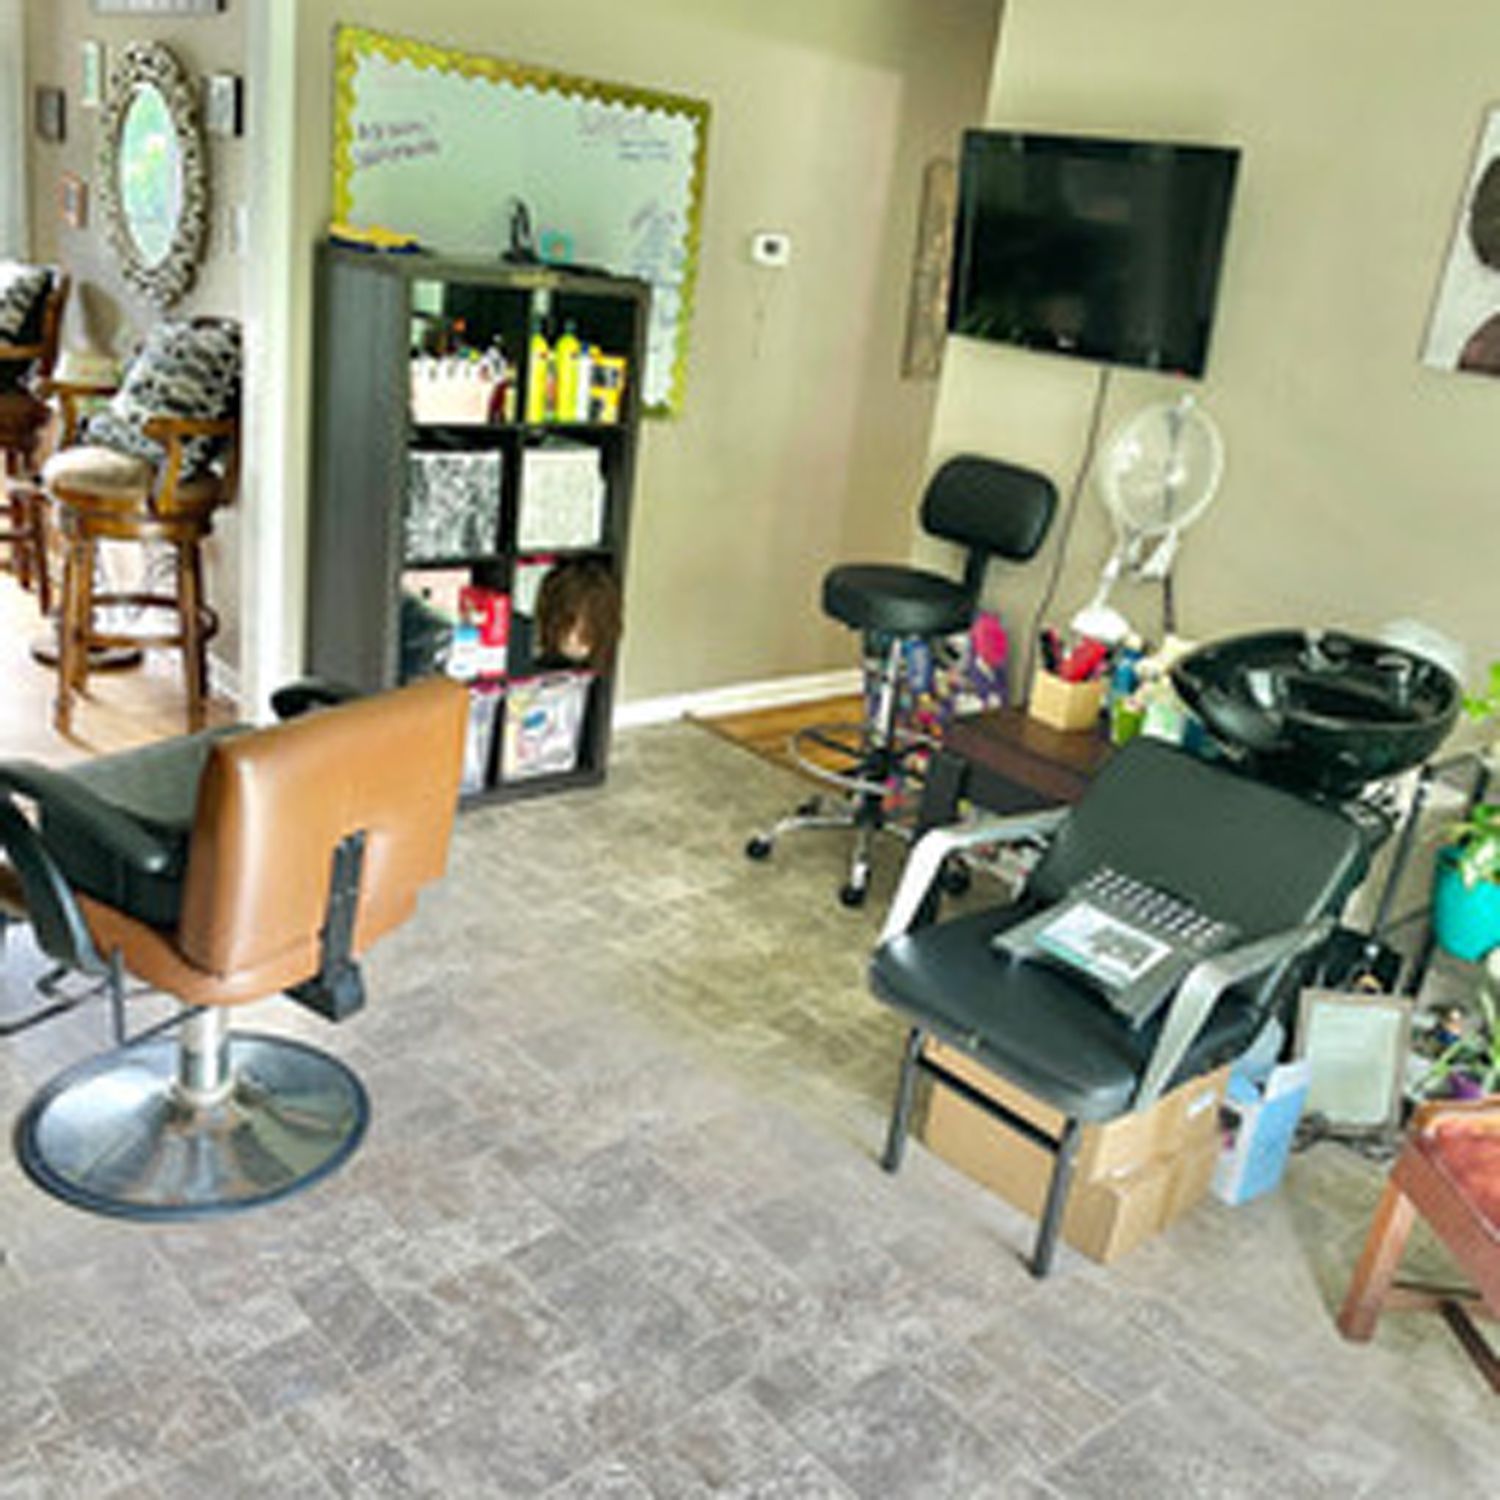 Salon | Fayetteville, NC | A & A Janitorial Services LLC